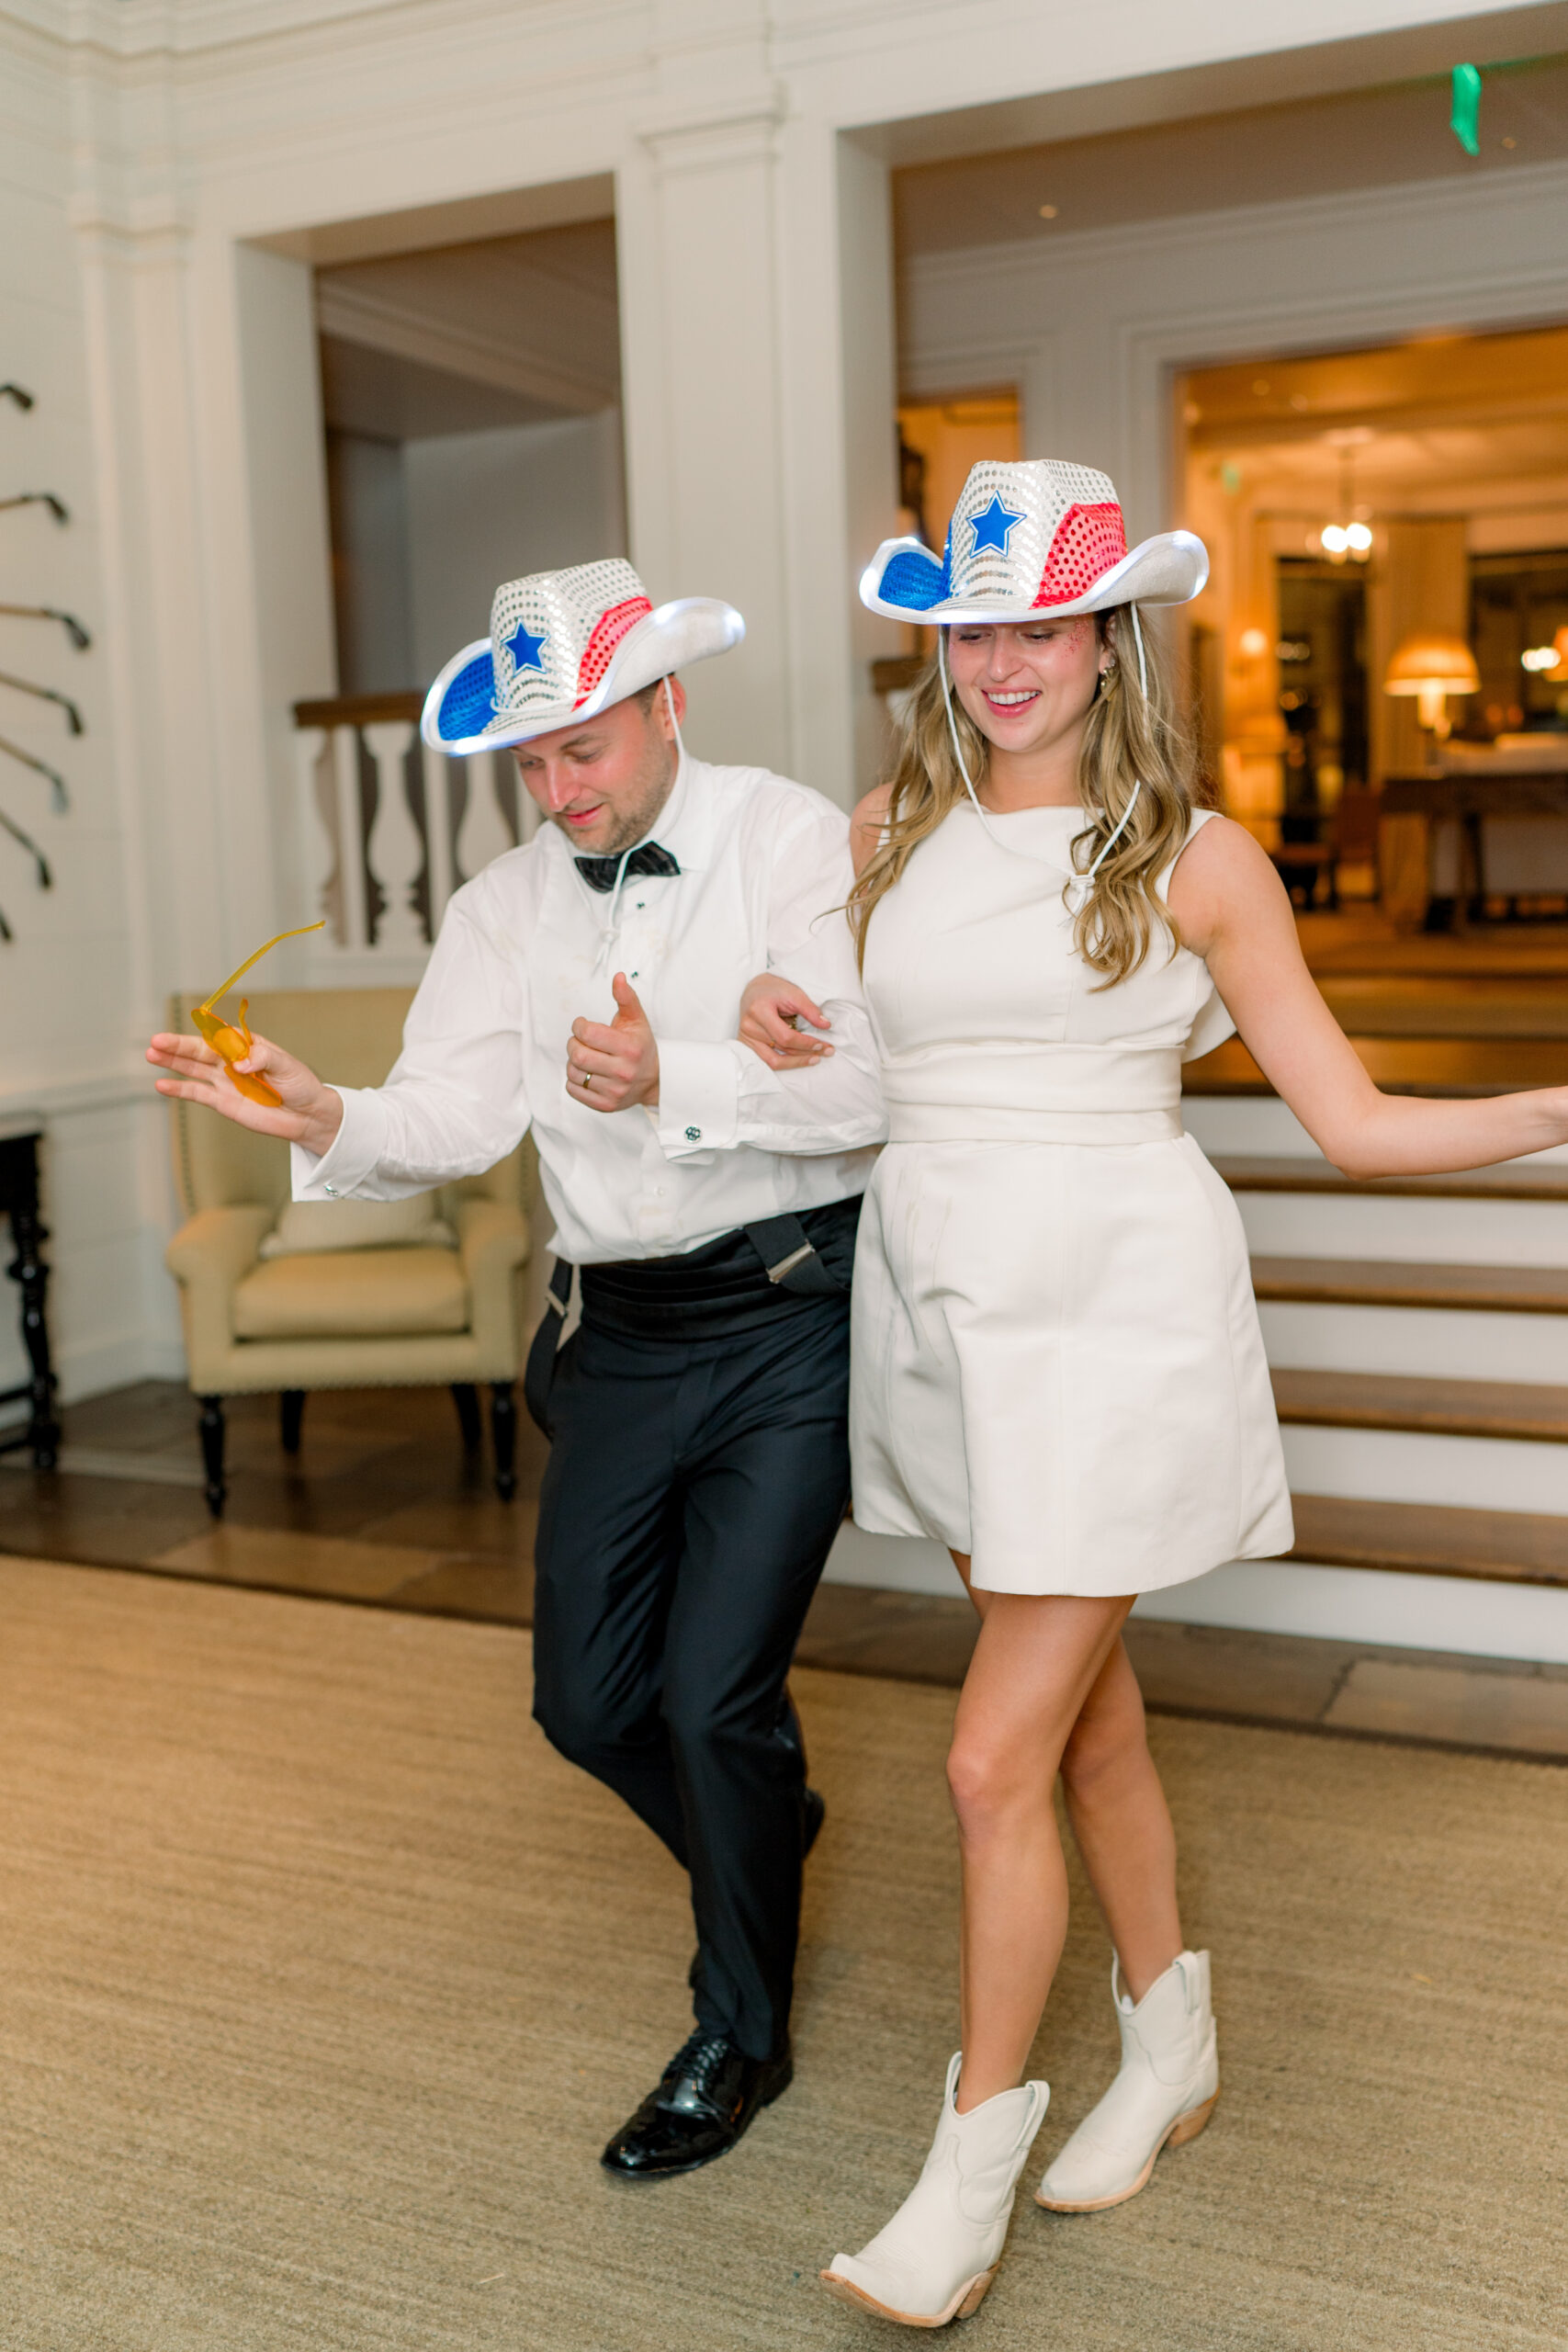 Texas bride and groom fun stetson party hats. Walking to the beat. 